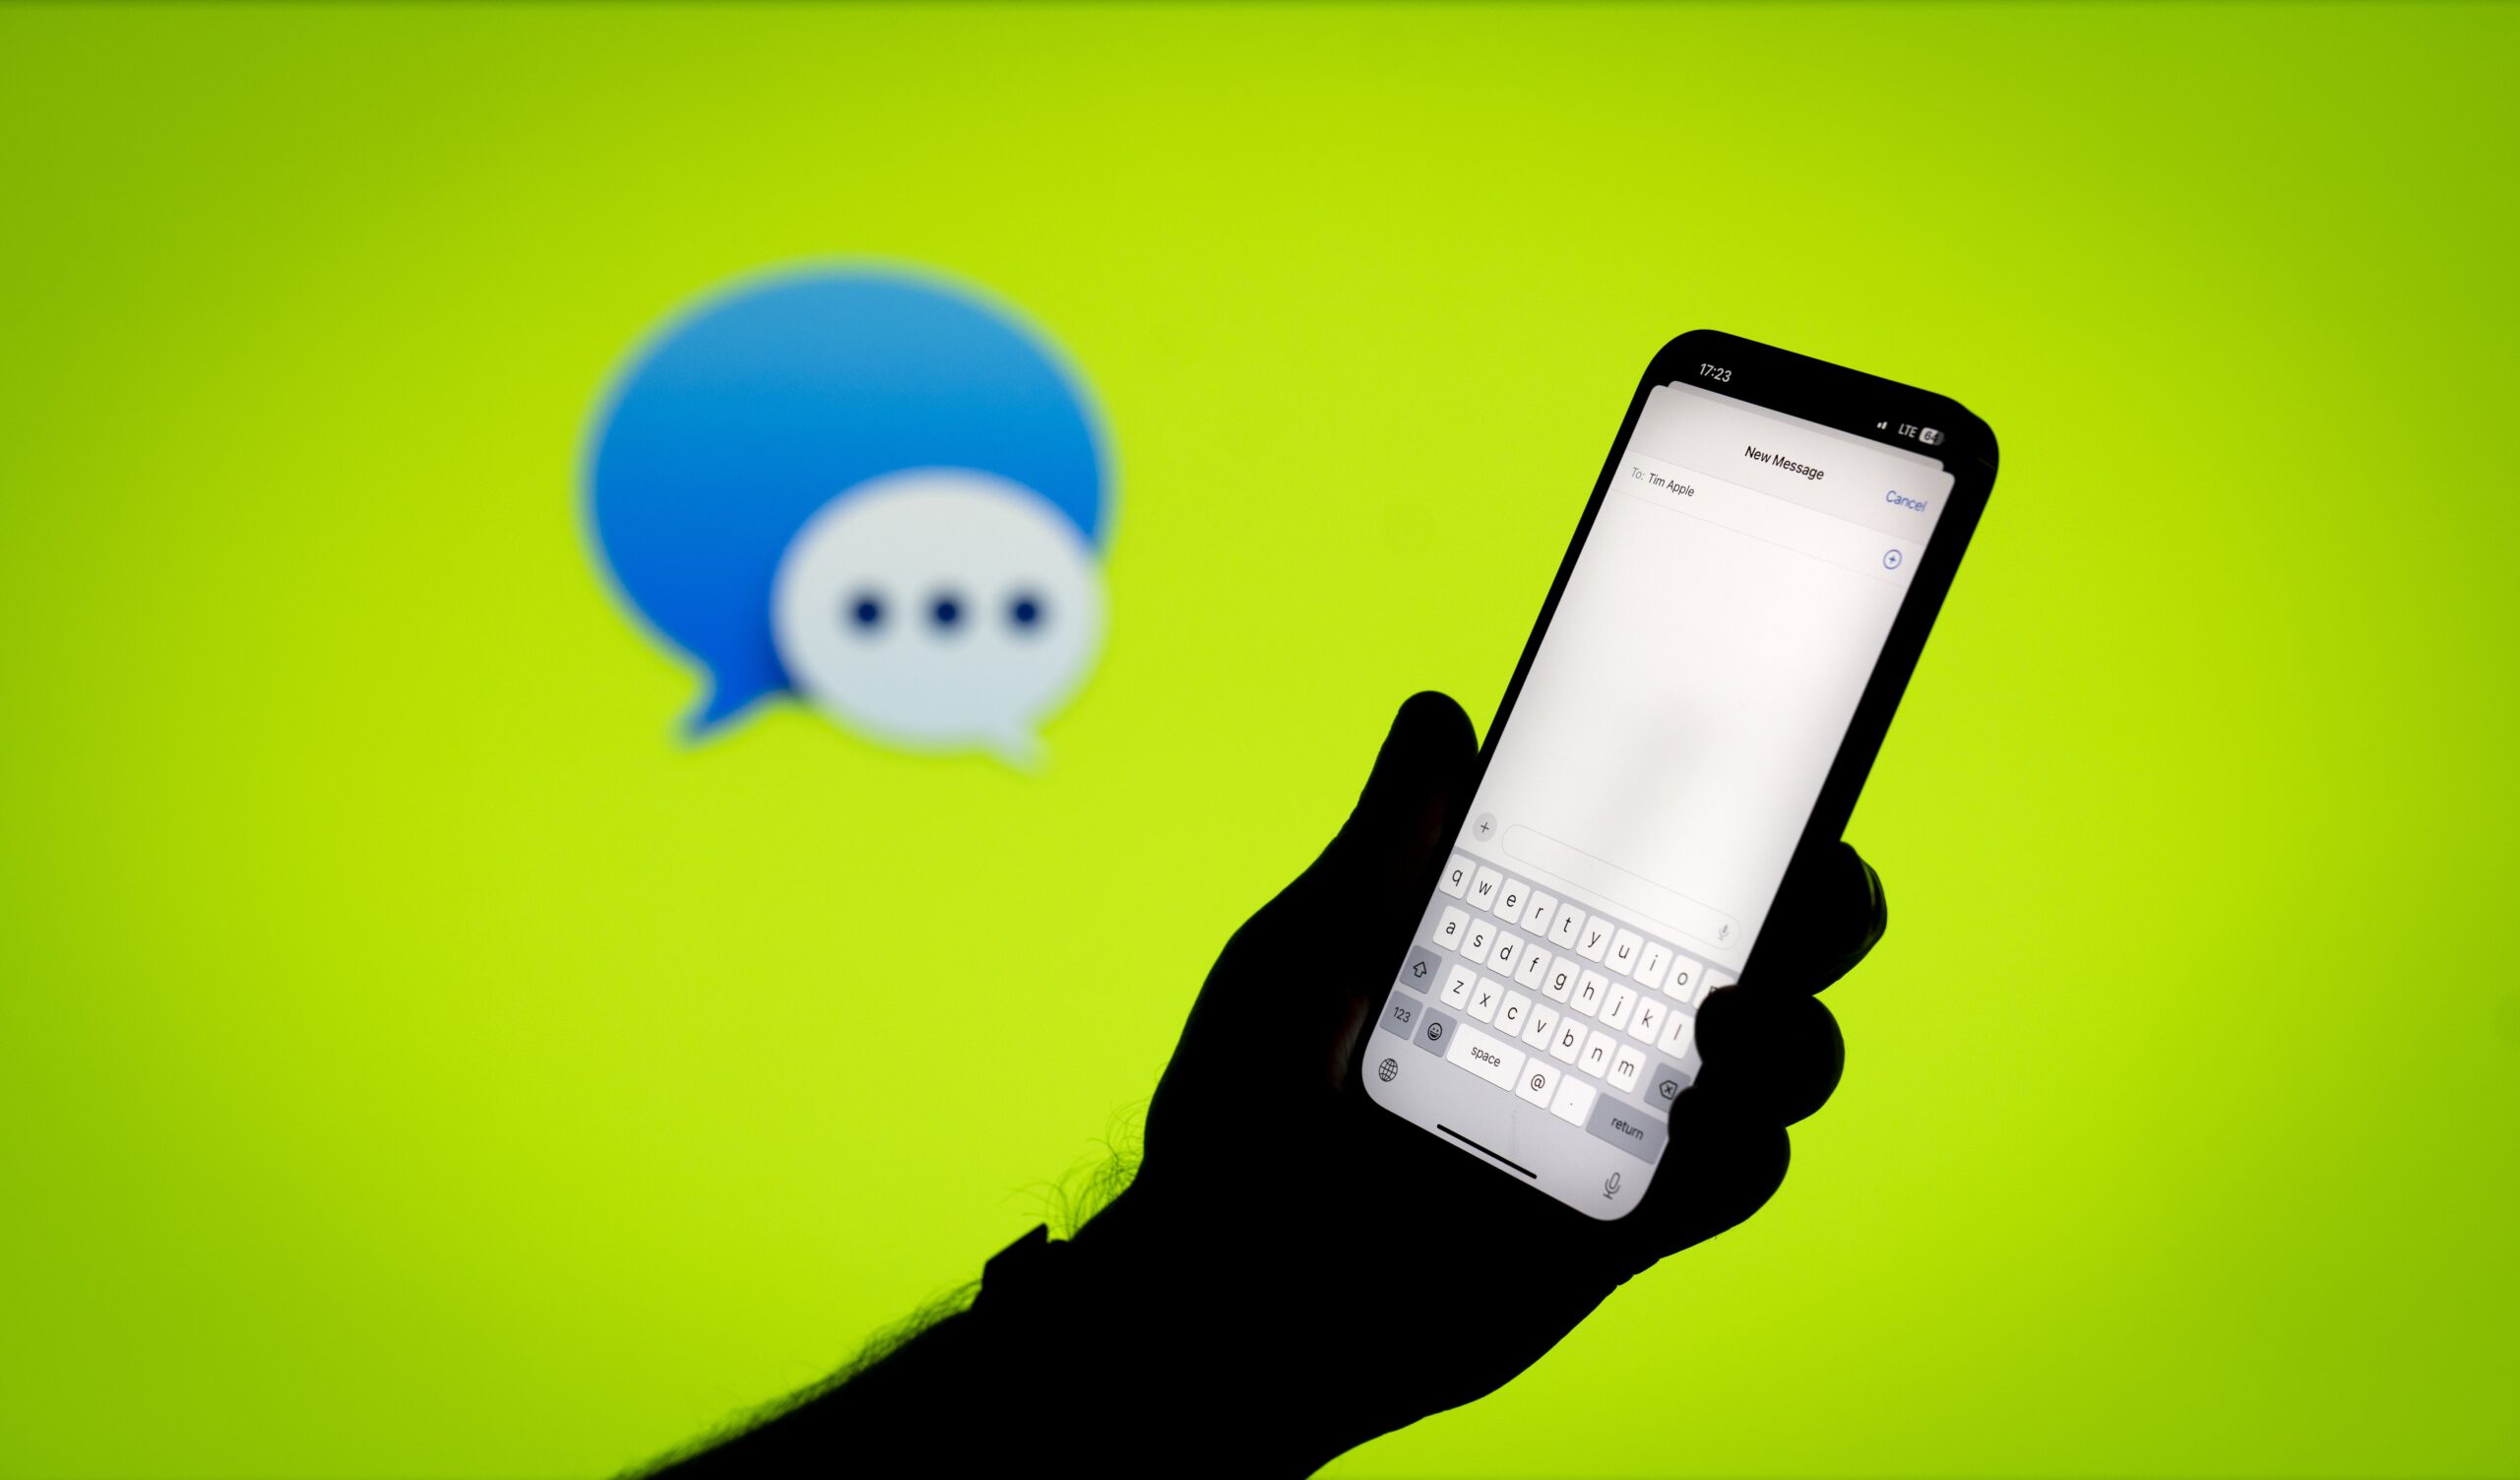  Apple iMessage app open on phone in front of green backdrop with iMessage logo